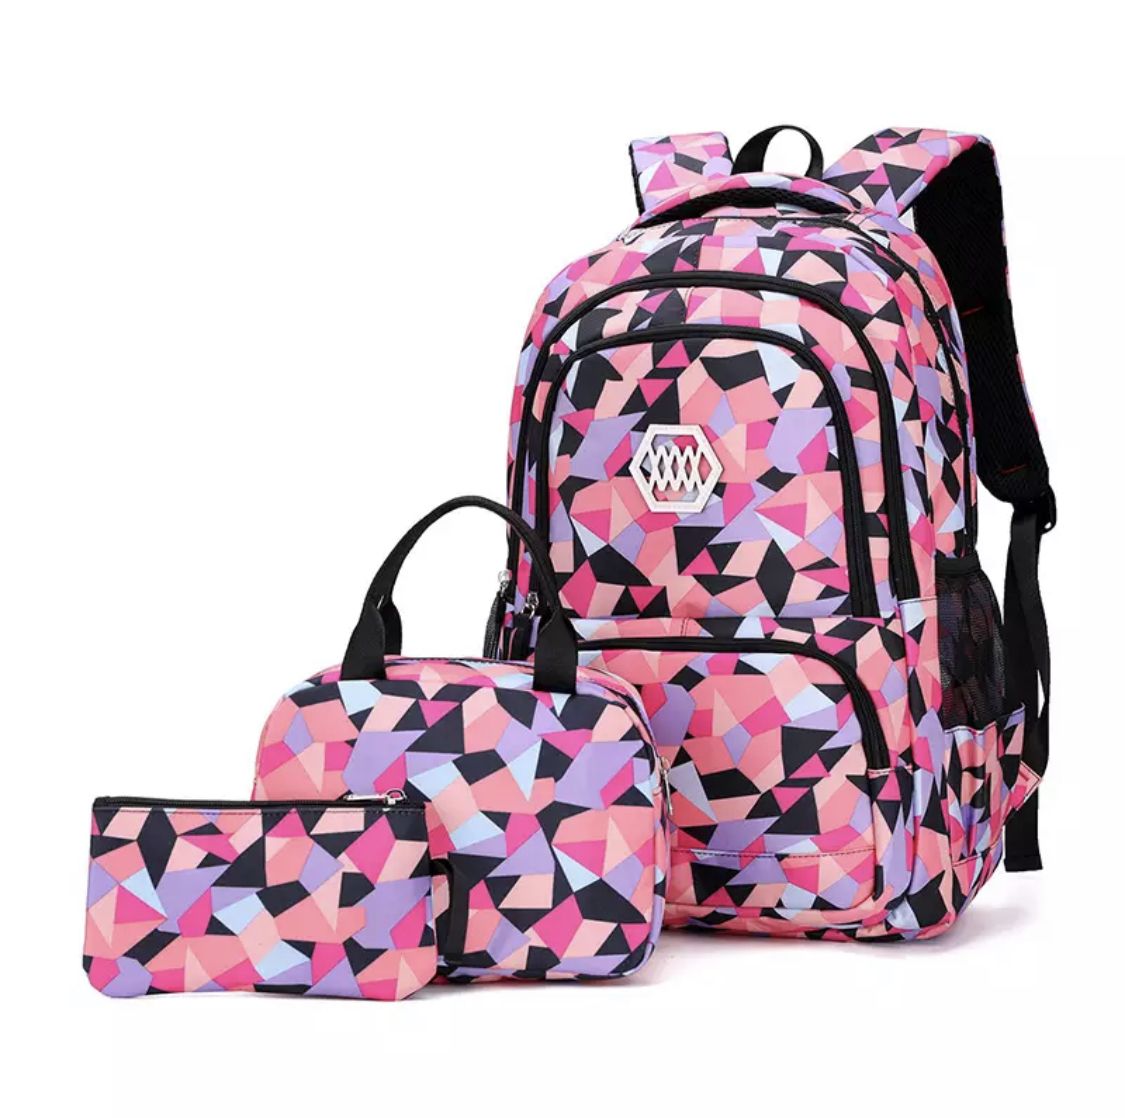 The Clip - Backpack 3 Pieces set Geometric Prints Waterproof schoolbag, Shop Today. Get it Tomorrow!